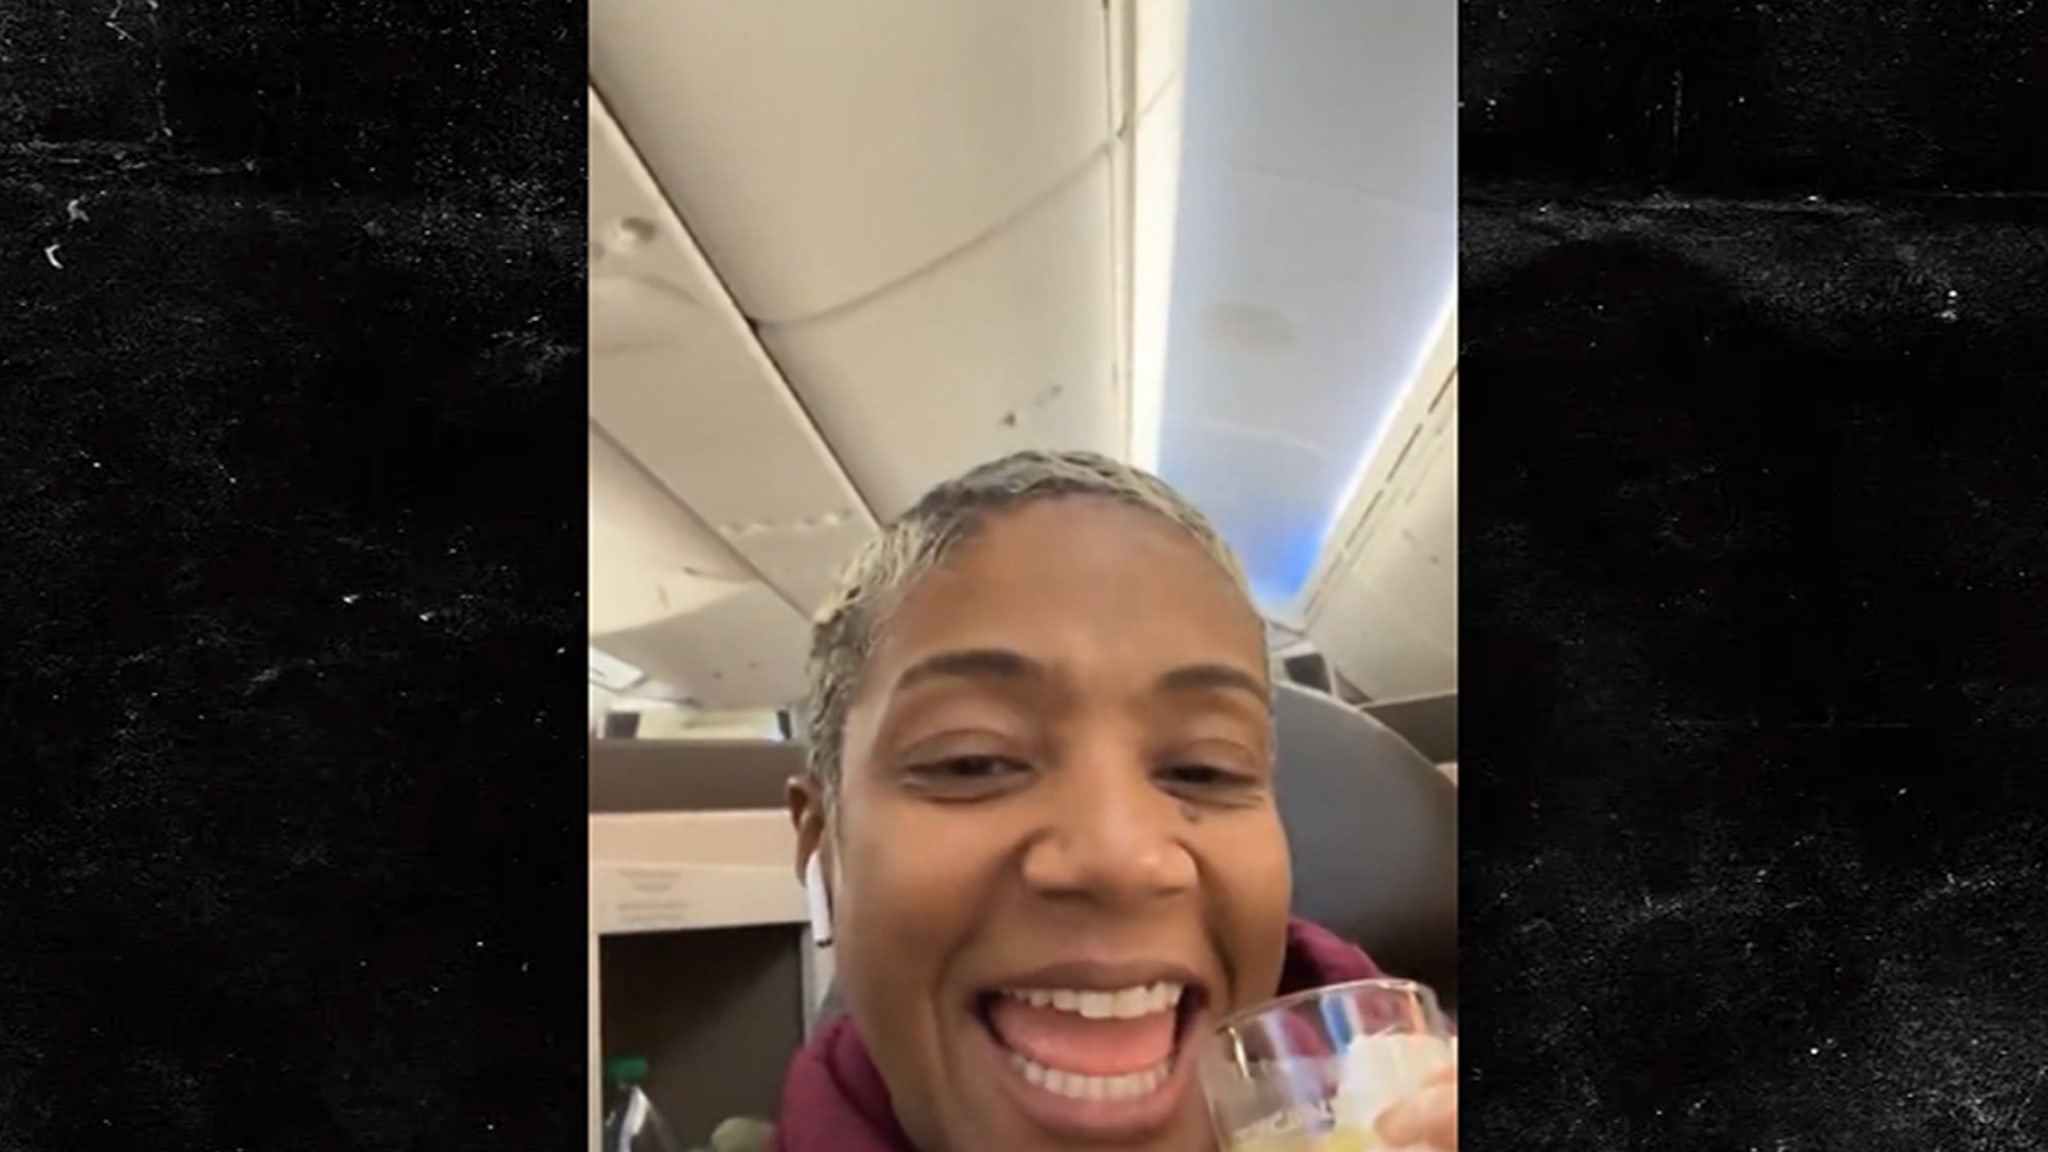 Tiffany Haddish Angers Social Media Over Israel Trip, But She's Sincere